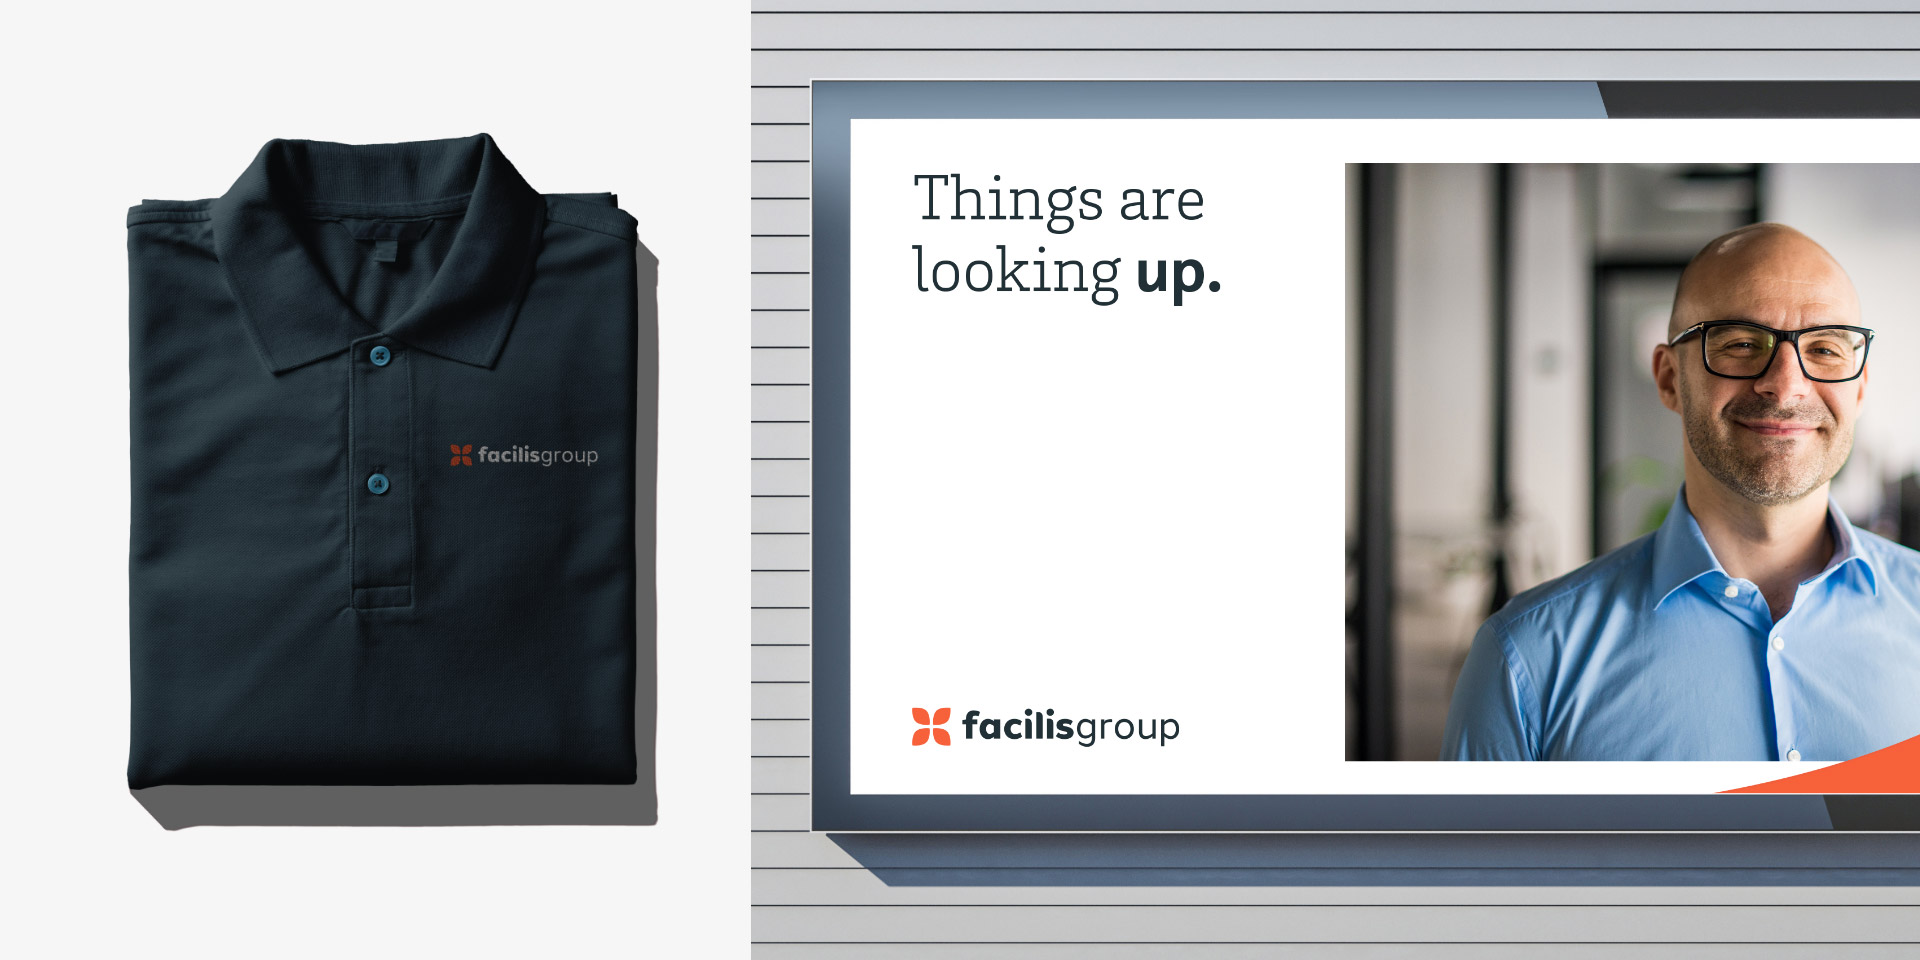 The new Facilisgroup brand identity on creative expressions including a polo and out-of-home advertising sign